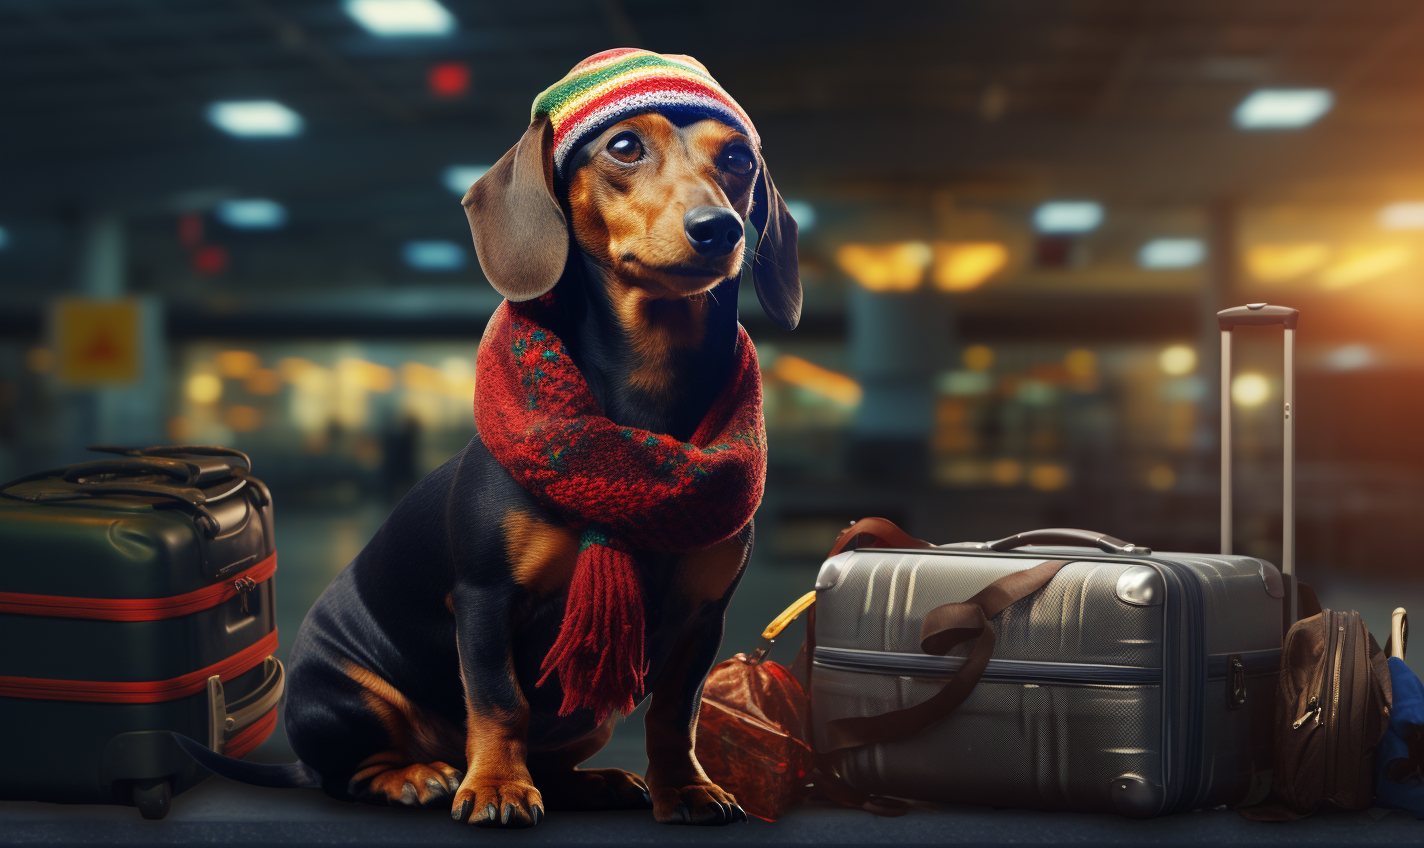 New Year, New Adventures: Discovering the World with Your Dachshund